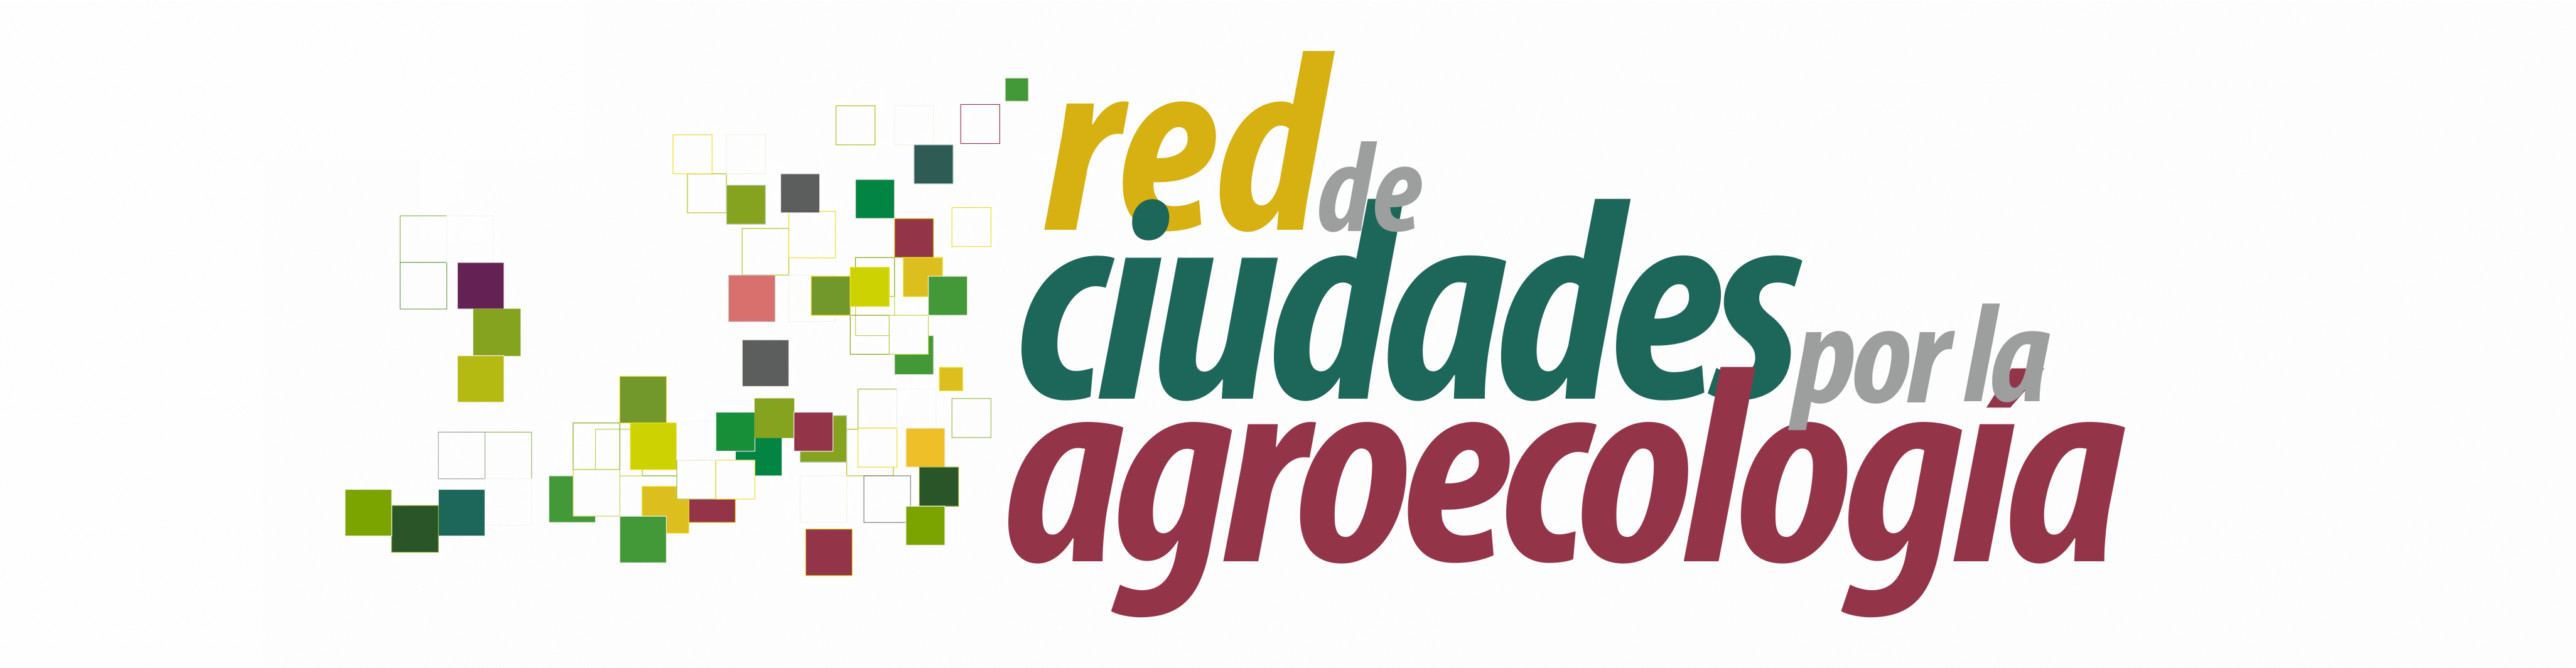 Red ciudades agroecologia